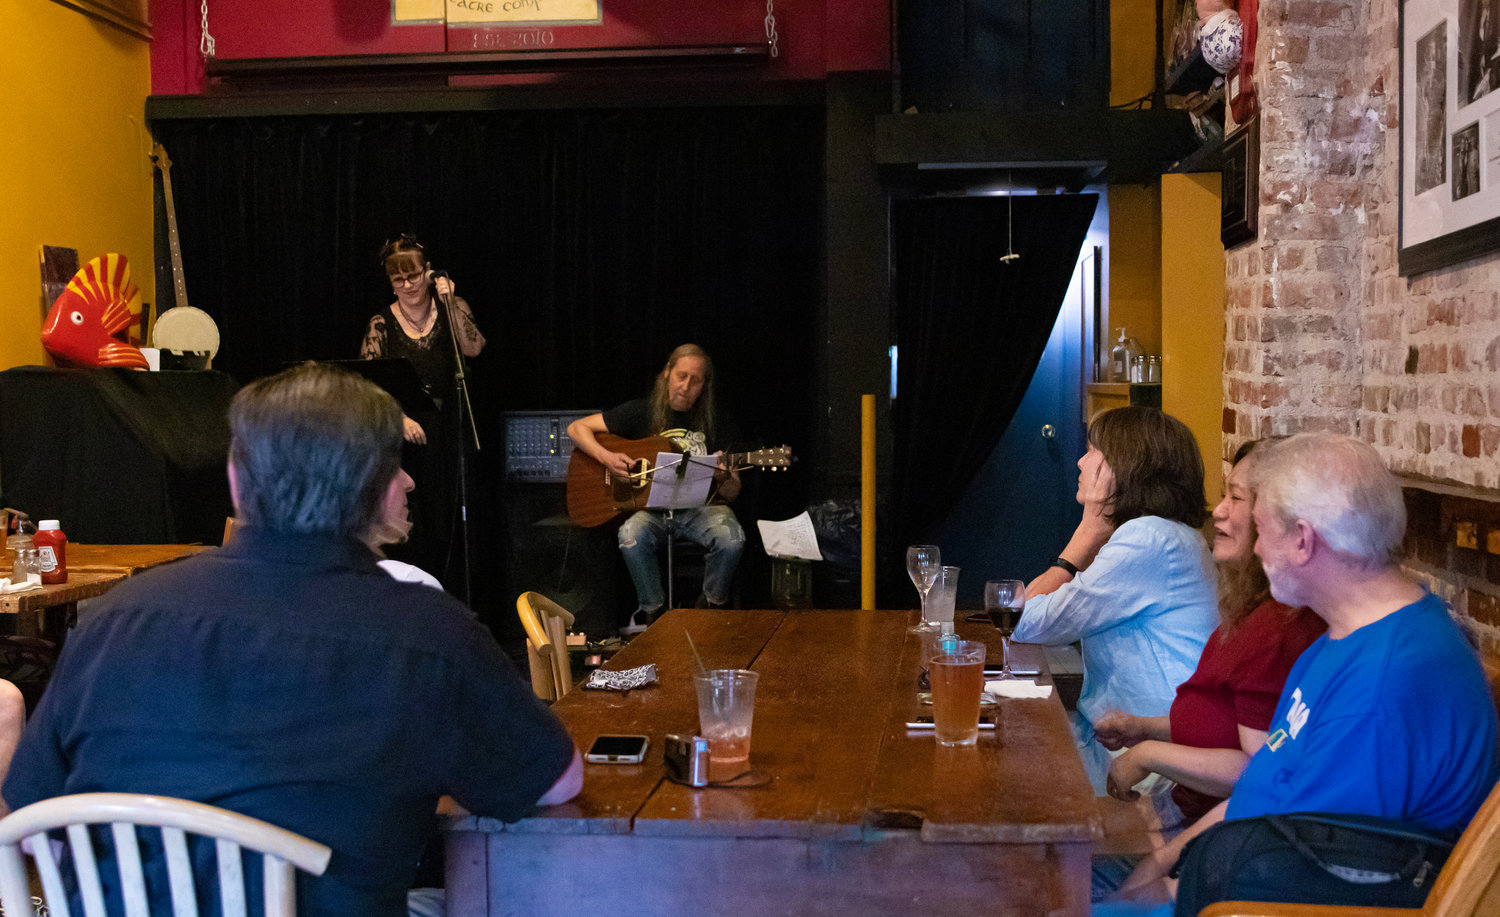 Suzanne and Seeing Voices took the An Beal Bocht stage on June 26 to play their role in the reintegration of live music into the West 238th Street pub’s routine. After the less-than-sing-song height of the coronavirus pandemic, An Beal is once again booking live music.